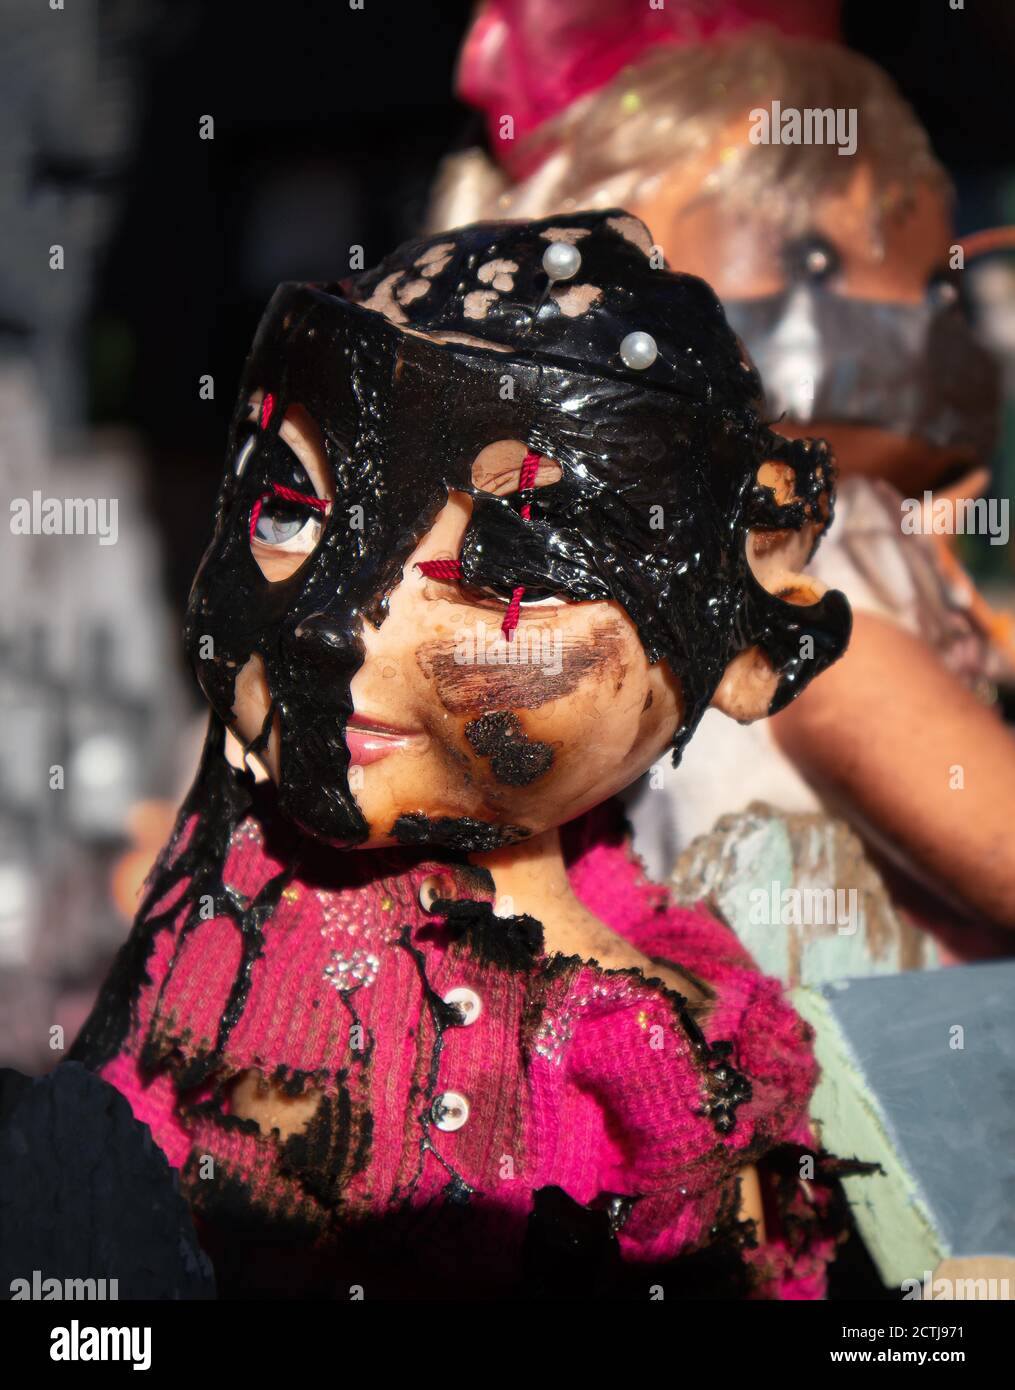 Creepy baby doll. Outside Halloween decoration. Head shot of doll with eyes stitched close and black mask. Stock Photo